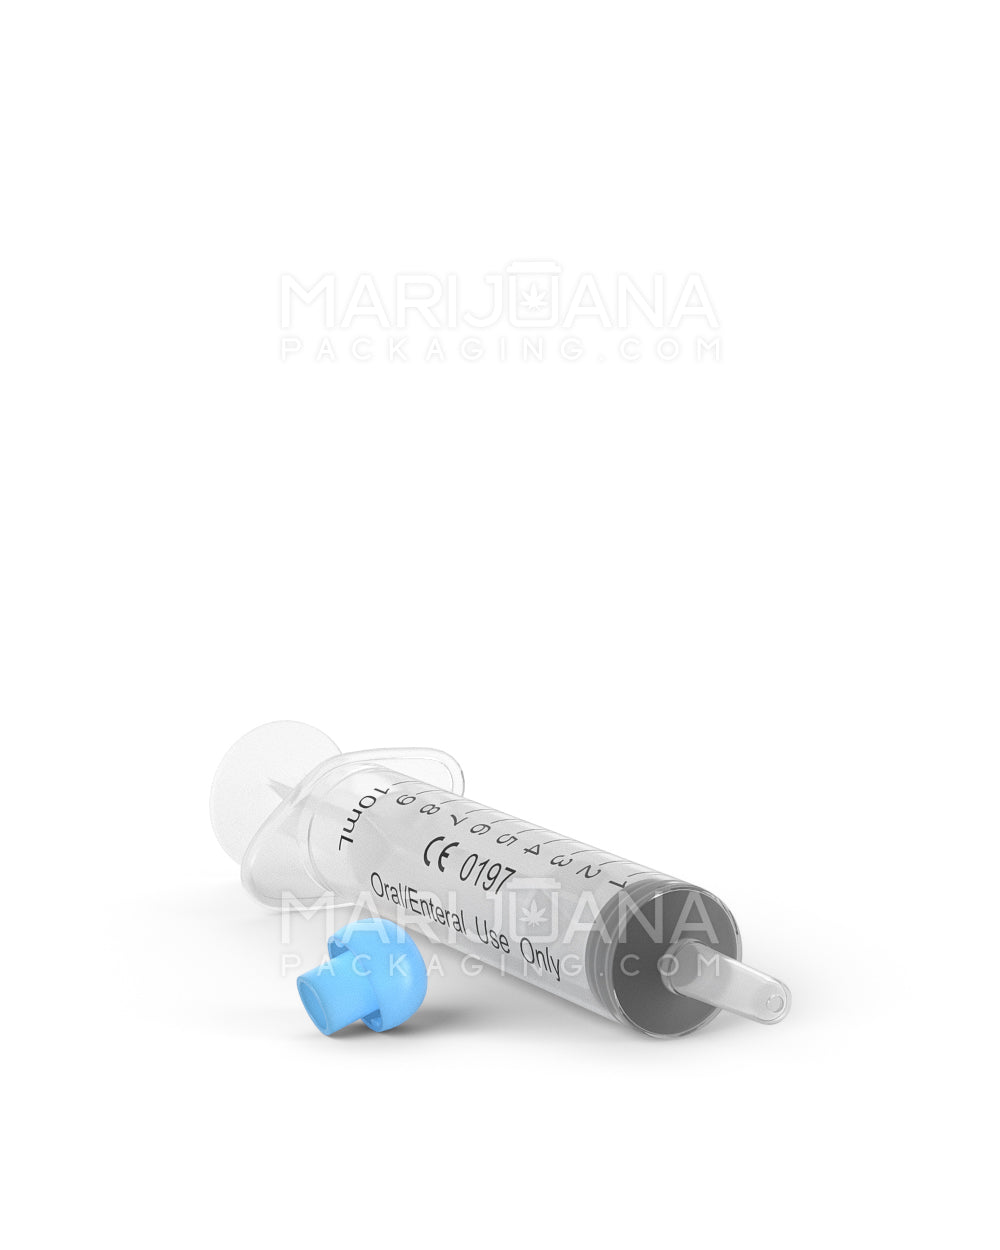 Plastic Oral Concentrate Syringes | 10mL - 1mL Increments | Sample - 4